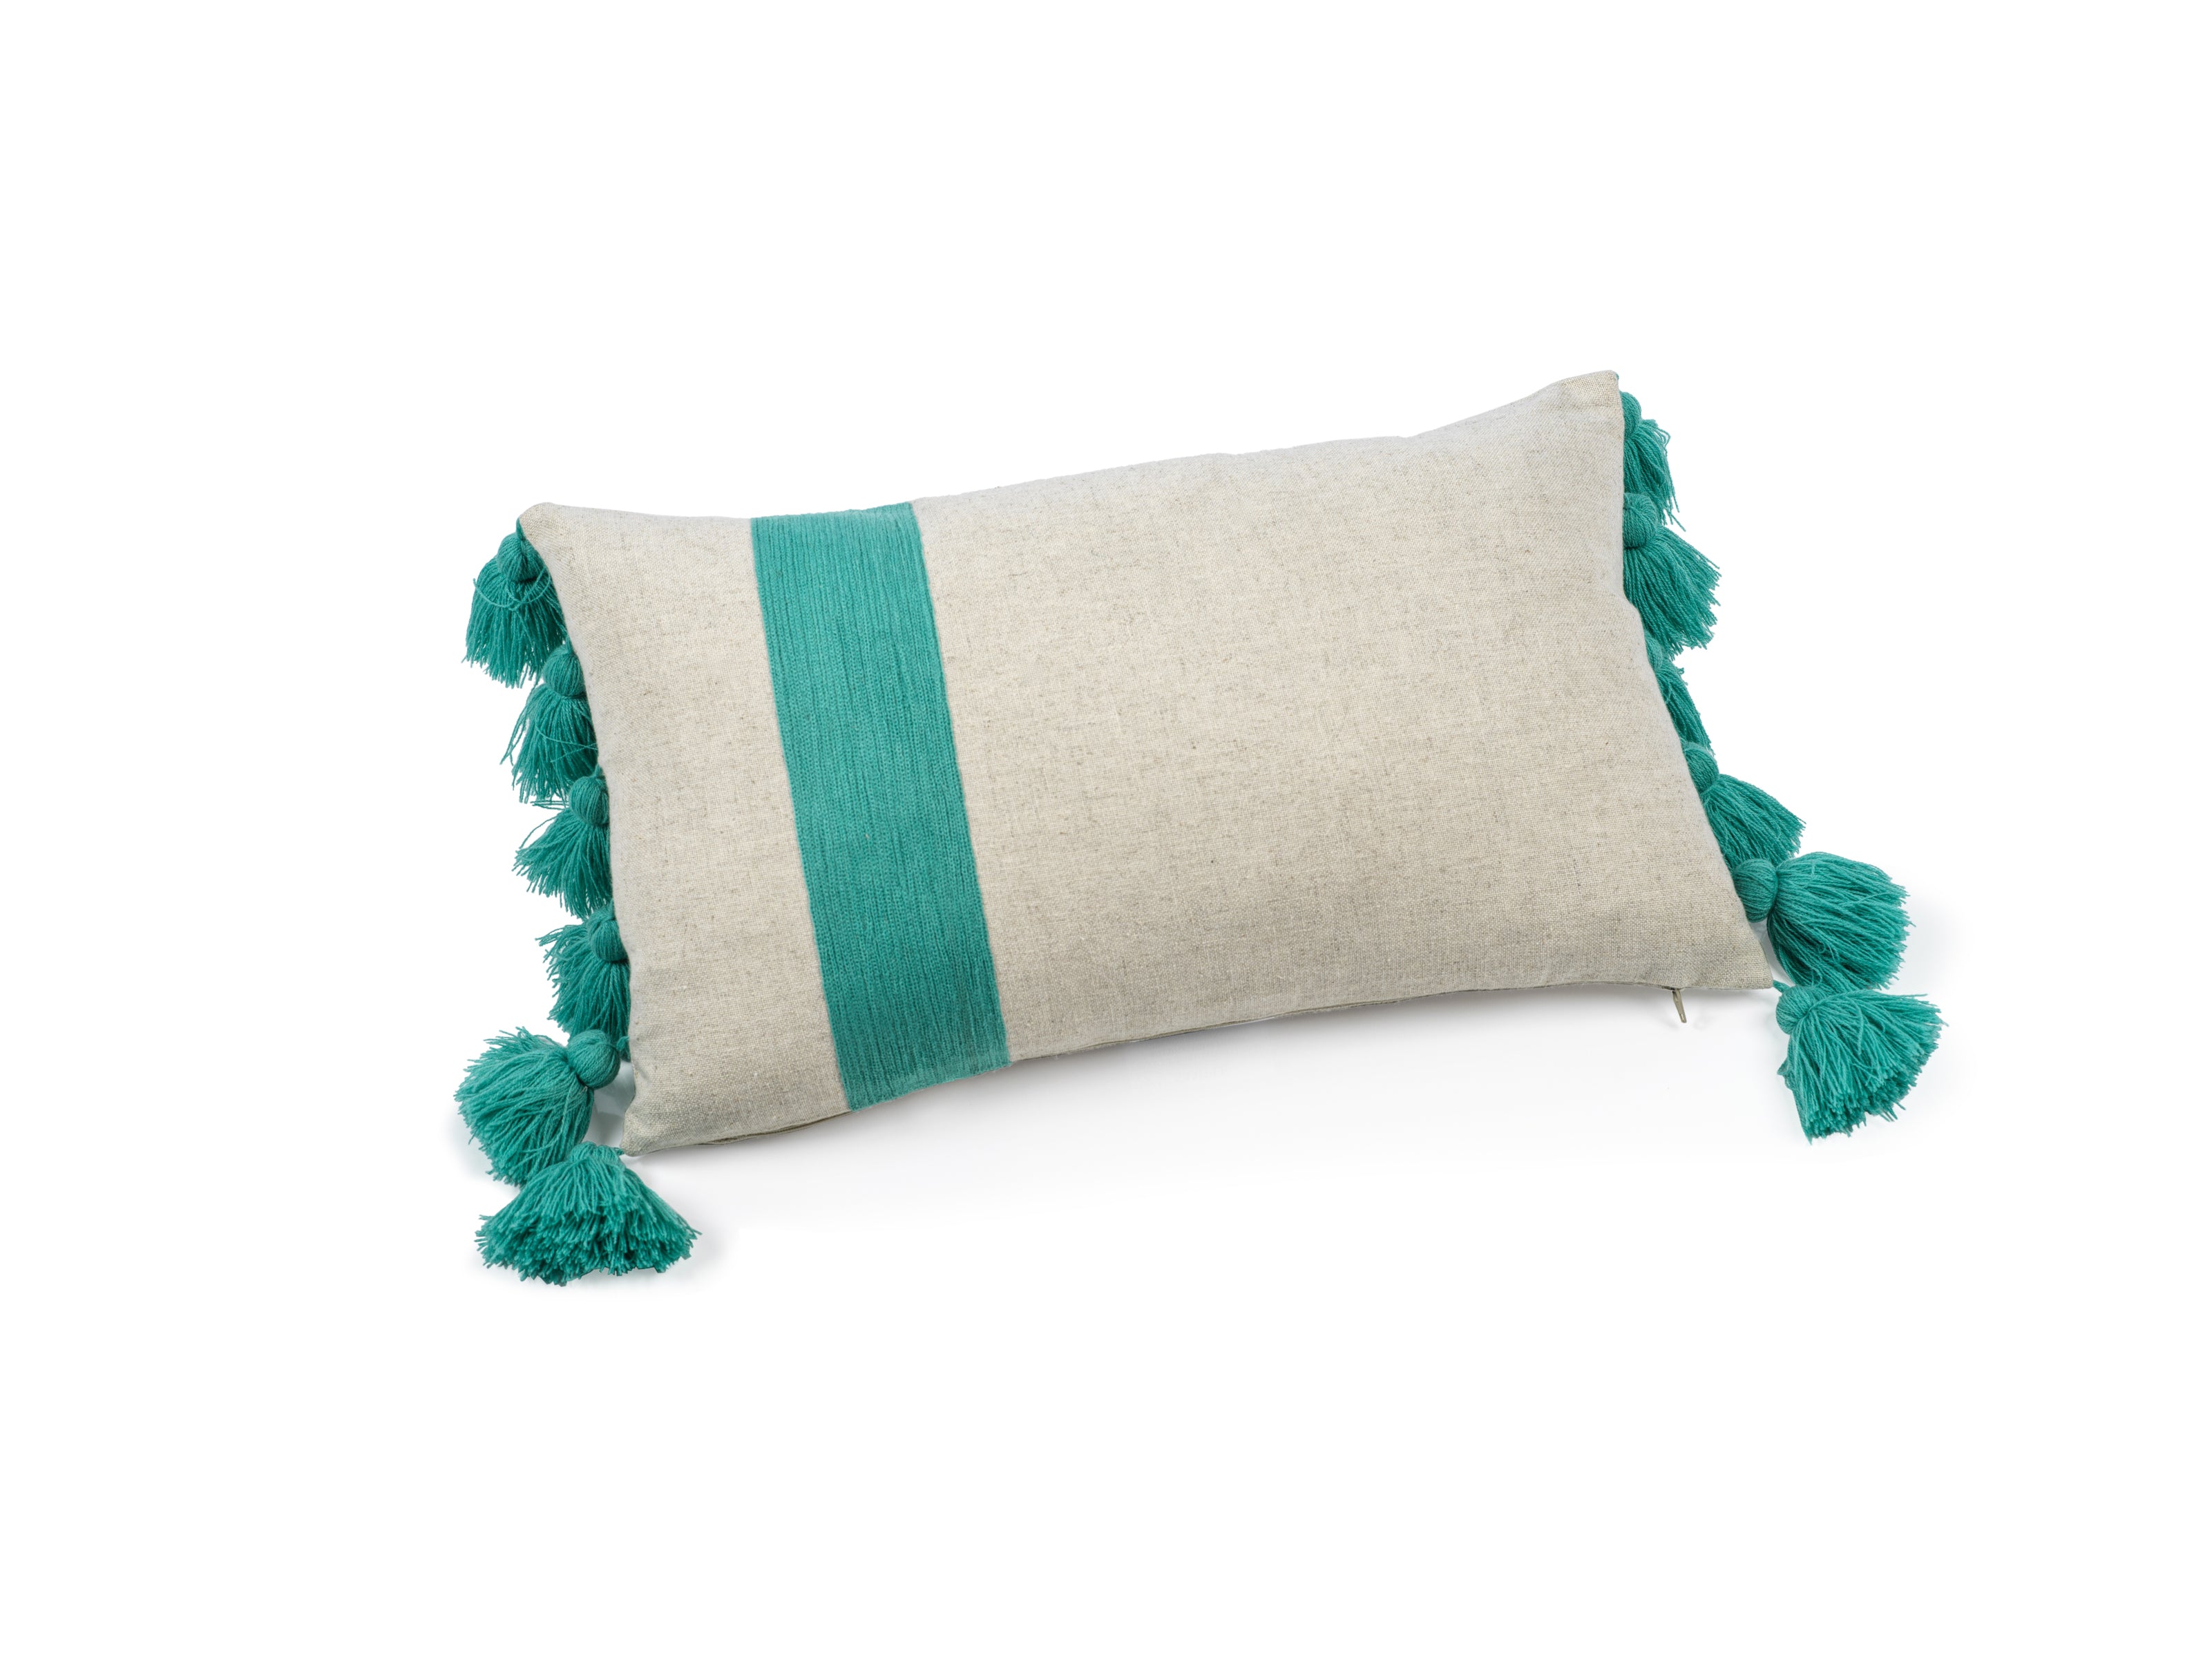 Polignano Embroidered Throw Pillow w/Tassels - Turquoise - CARLYLE AVENUE